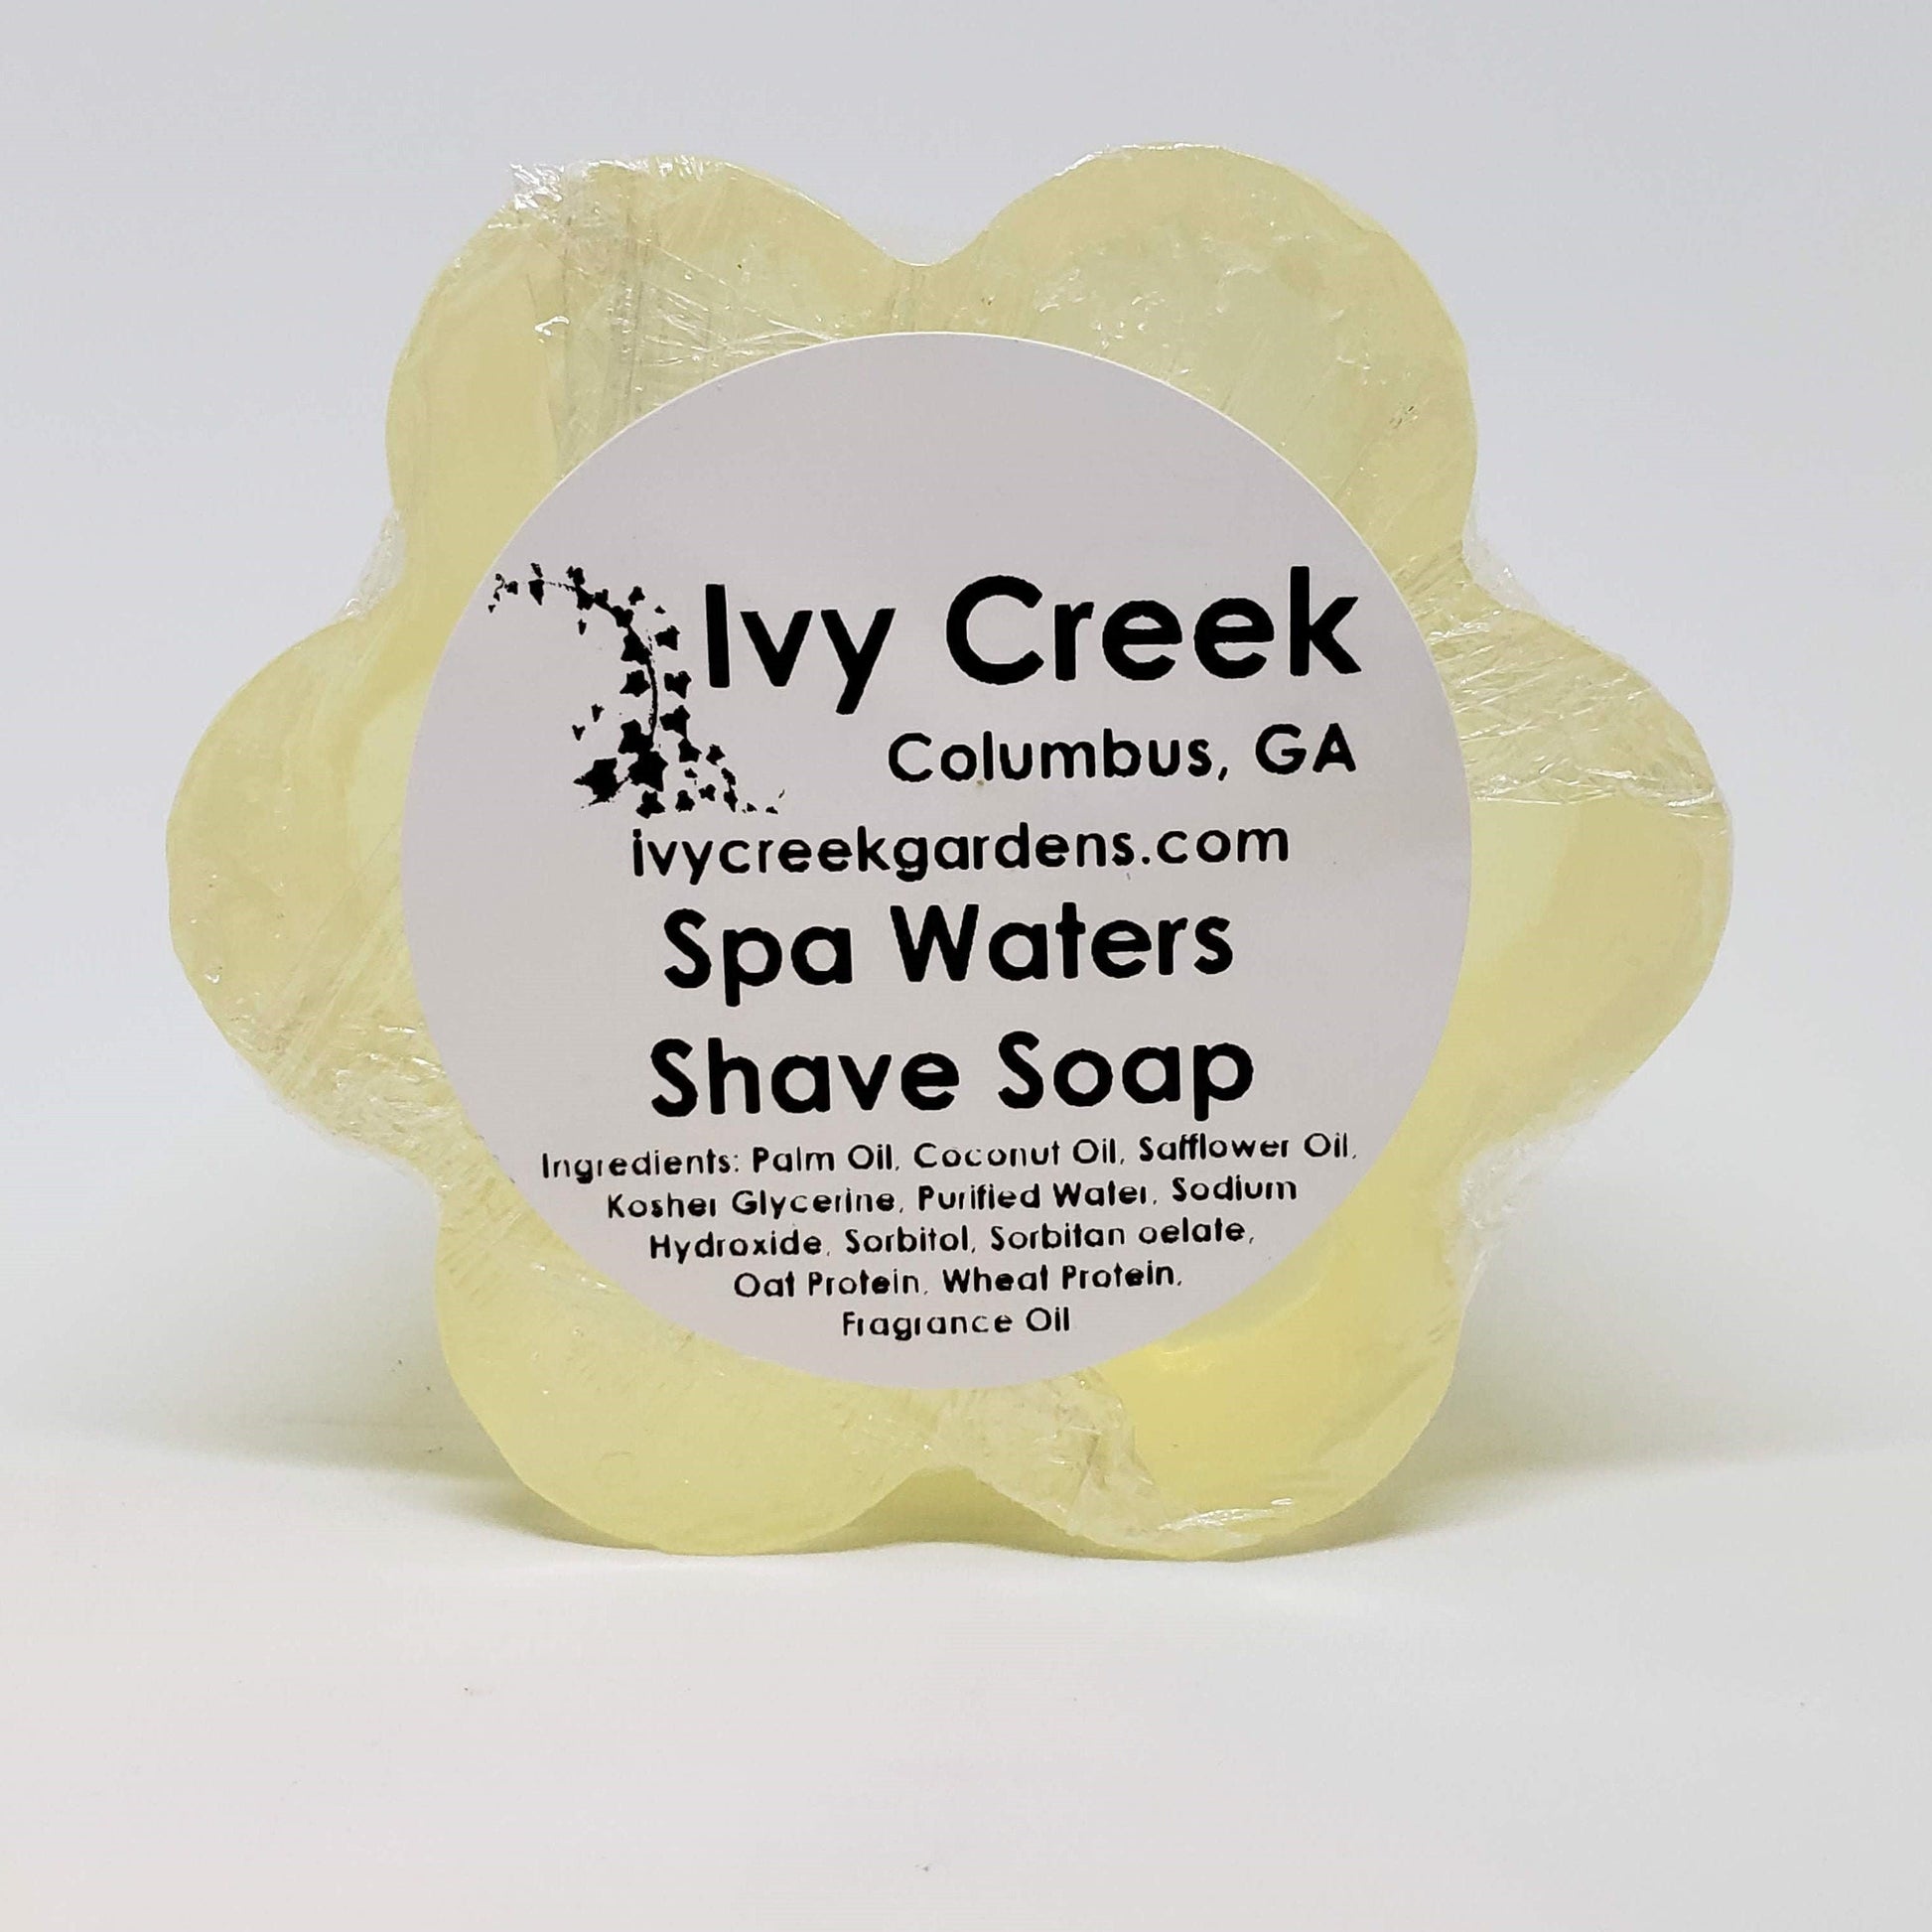 Ivy Creek Spa Waters Shave Soap | Glycerin Shave Soap | Perfect Shave | Natural Prevents Razor Burn | Gifts for Her | Gifts for Him | 3.5 oz